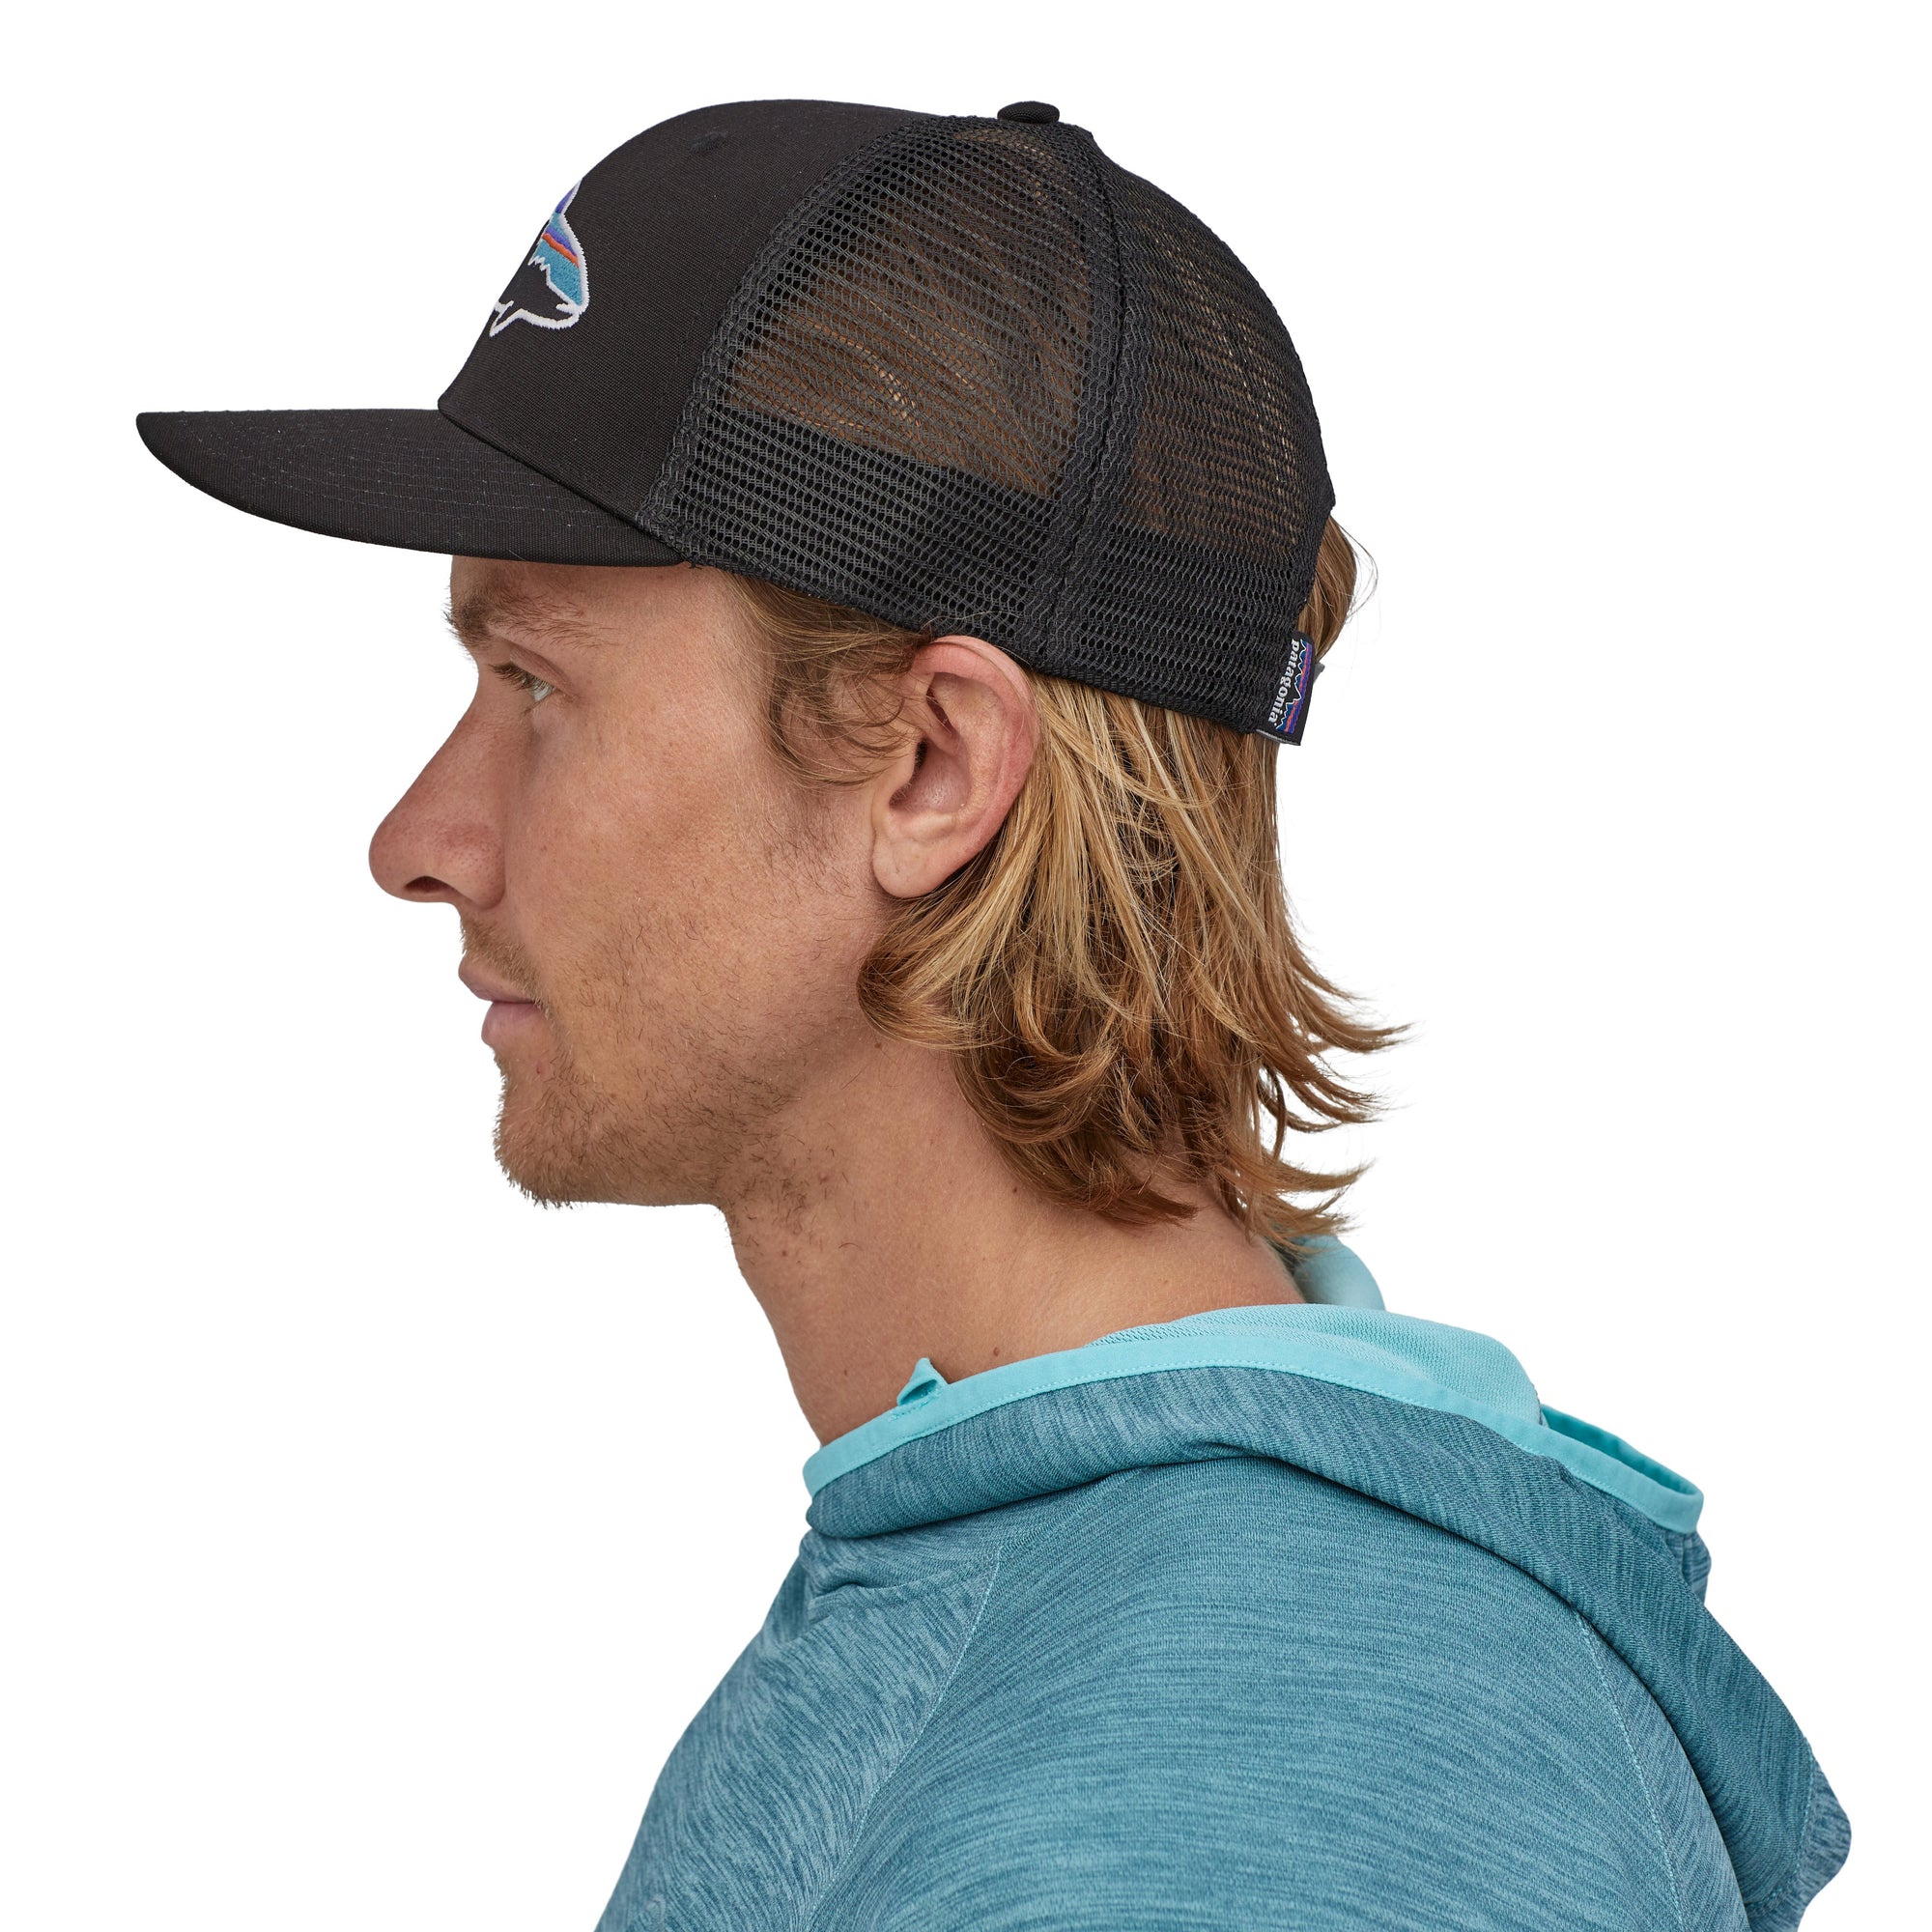 Buy men s fishing hats and caps Online in Seychelles at Low Prices